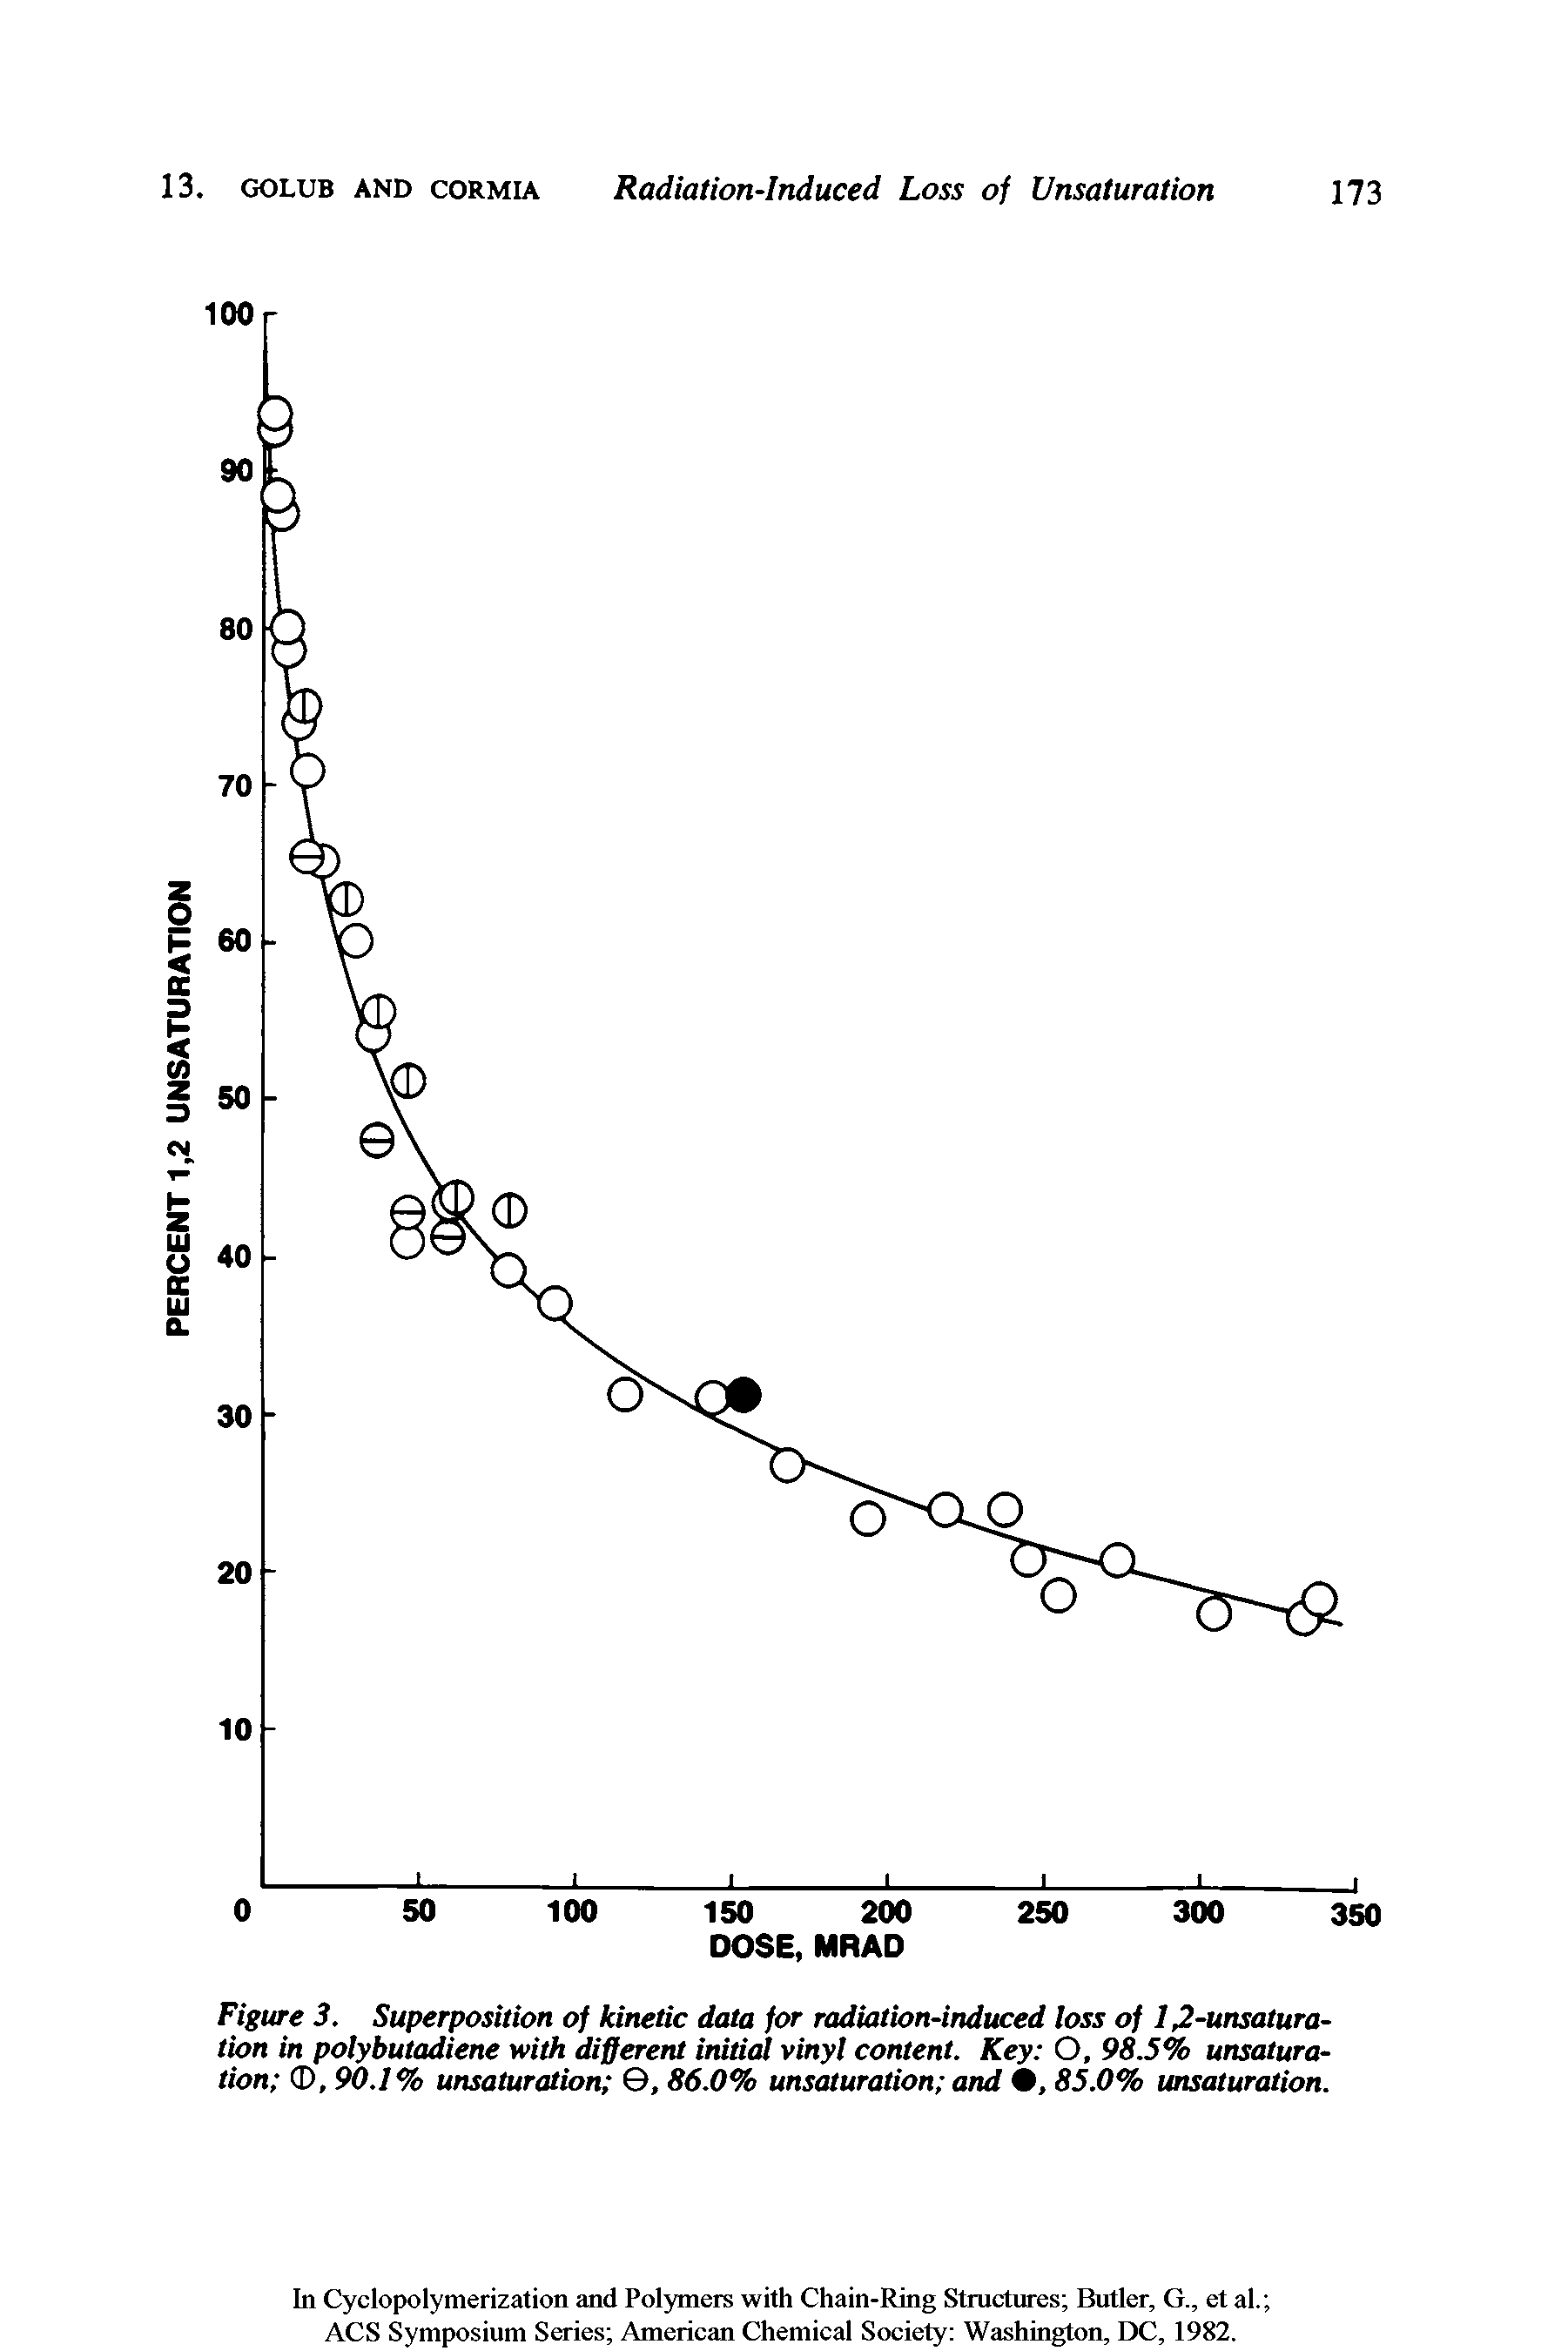 Figure 3. Superposition of kinetic data for radiation-induced loss of 12-unsaturation in polybutadiene with different initial vinyl content. Key O, 98.5% unsaturation CD, 90.1% unsaturation , 86.0% unsaturation and , 85.0% unsaturation.